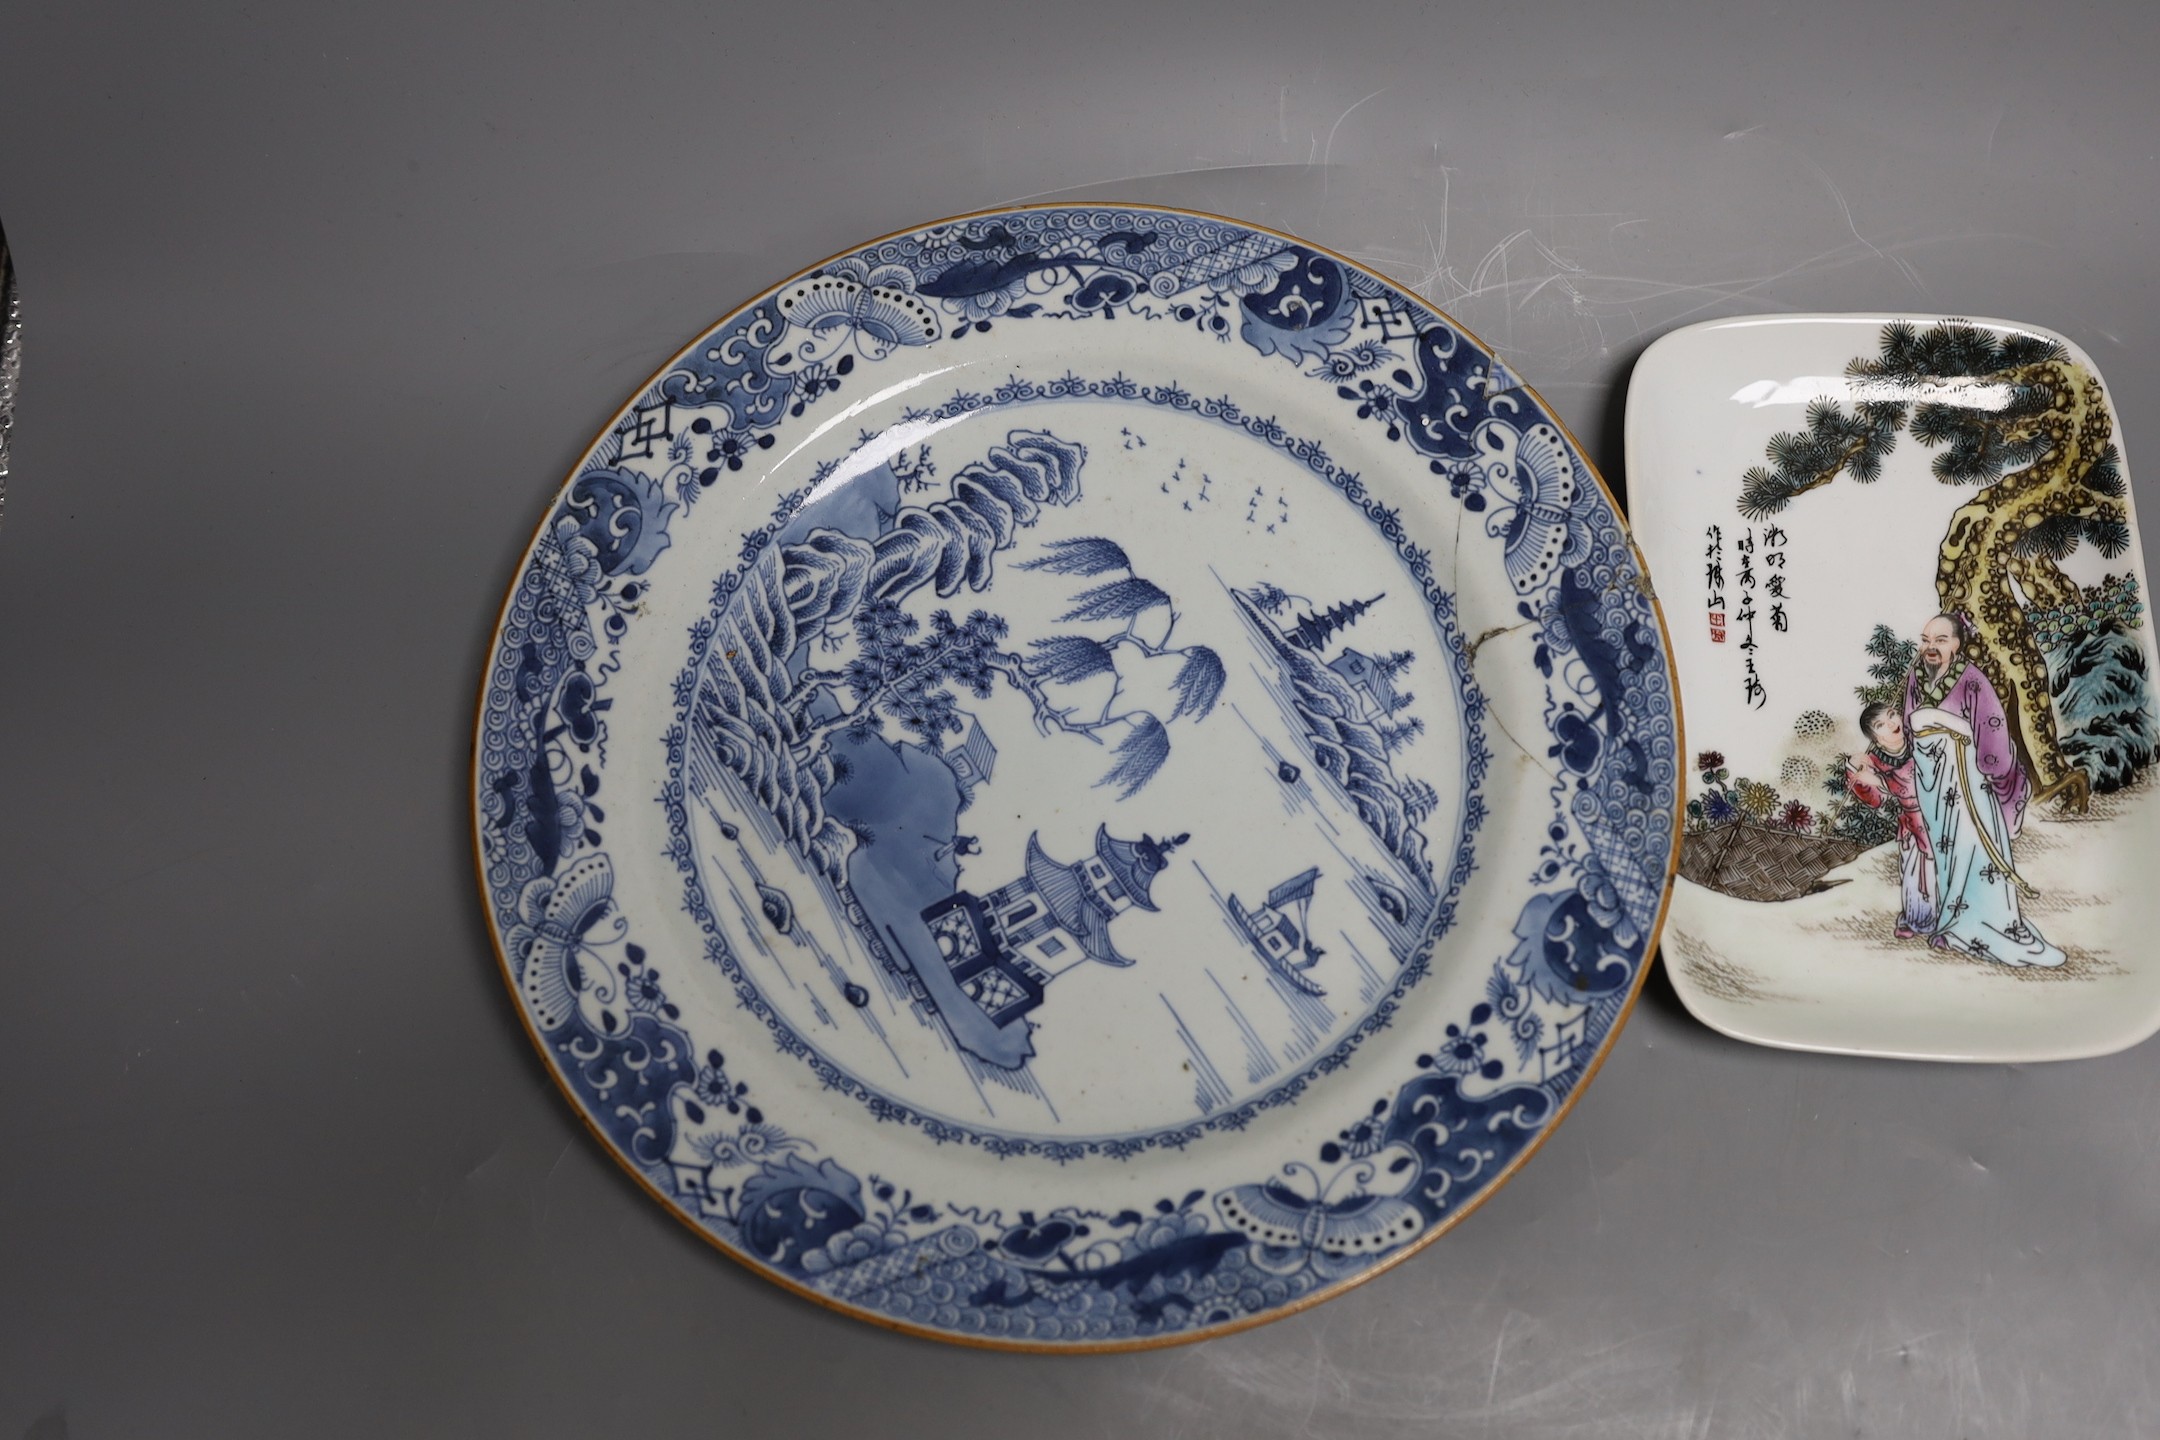 Four 18th / 19th century Chinese plates, and a later dishlargest plate 29 cms diameter, - Image 4 of 6